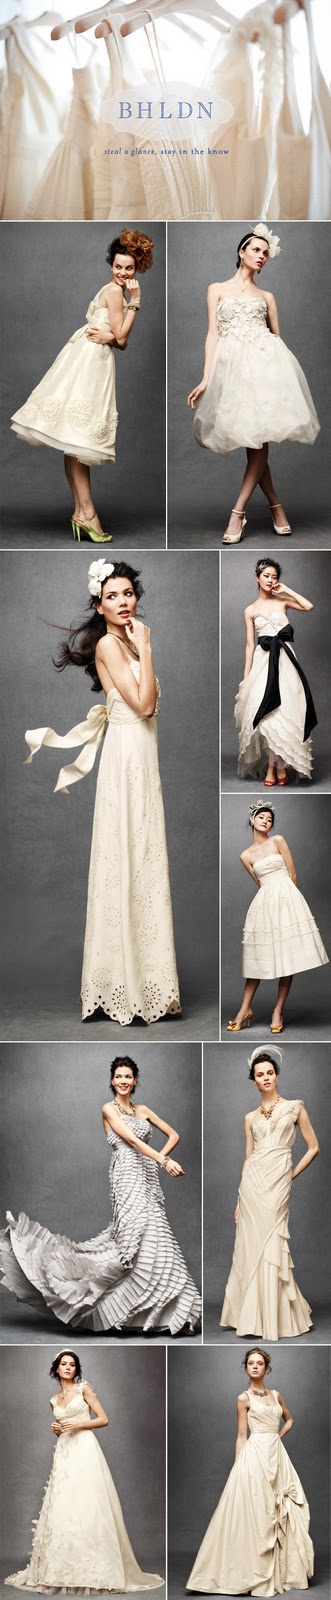 Here's a sneak peek of their whimsical wedding gowns